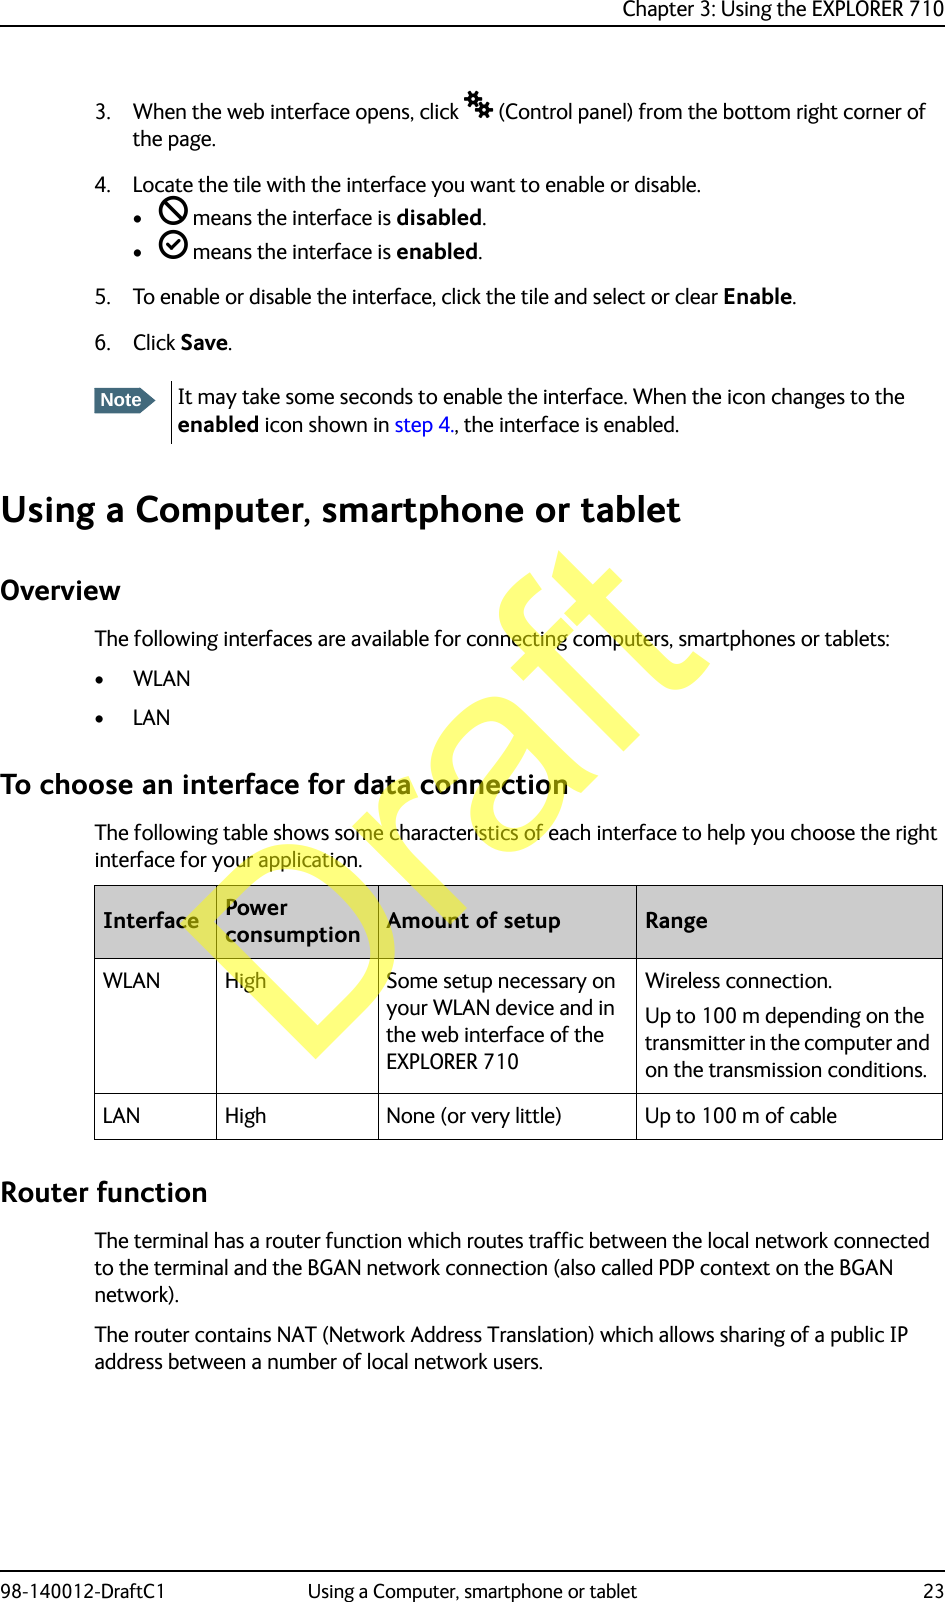 Chapter 3: Using the EXPLORER 71098-140012-DraftC1 Using a Computer, smartphone or tablet 233. When the web interface opens, click  (Control panel) from the bottom right corner of the page.4. Locate the tile with the interface you want to enable or disable.•  means the interface is disabled.•  means the interface is enabled.5. To enable or disable the interface, click the tile and select or clear Enable.6. Click Save.Using a Computer, smartphone or tabletOverviewThe following interfaces are available for connecting computers, smartphones or tablets:•WLAN•LANTo choose an interface for data connectionThe following table shows some characteristics of each interface to help you choose the right interface for your application.Router functionThe terminal has a router function which routes traffic between the local network connected to the terminal and the BGAN network connection (also called PDP context on the BGAN network).The router contains NAT (Network Address Translation) which allows sharing of a public IP address between a number of local network users.NoteIt may take some seconds to enable the interface. When the icon changes to the enabled icon shown in step 4., the interface is enabled.Interface Power consumption Amount of setup RangeWLAN High Some setup necessary on your WLAN device and in the web interface of the EXPLORER 710Wireless connection.Up to 100 m depending on the transmitter in the computer and on the transmission conditions.LAN High None (or very little) Up to 100 m of cableDraft